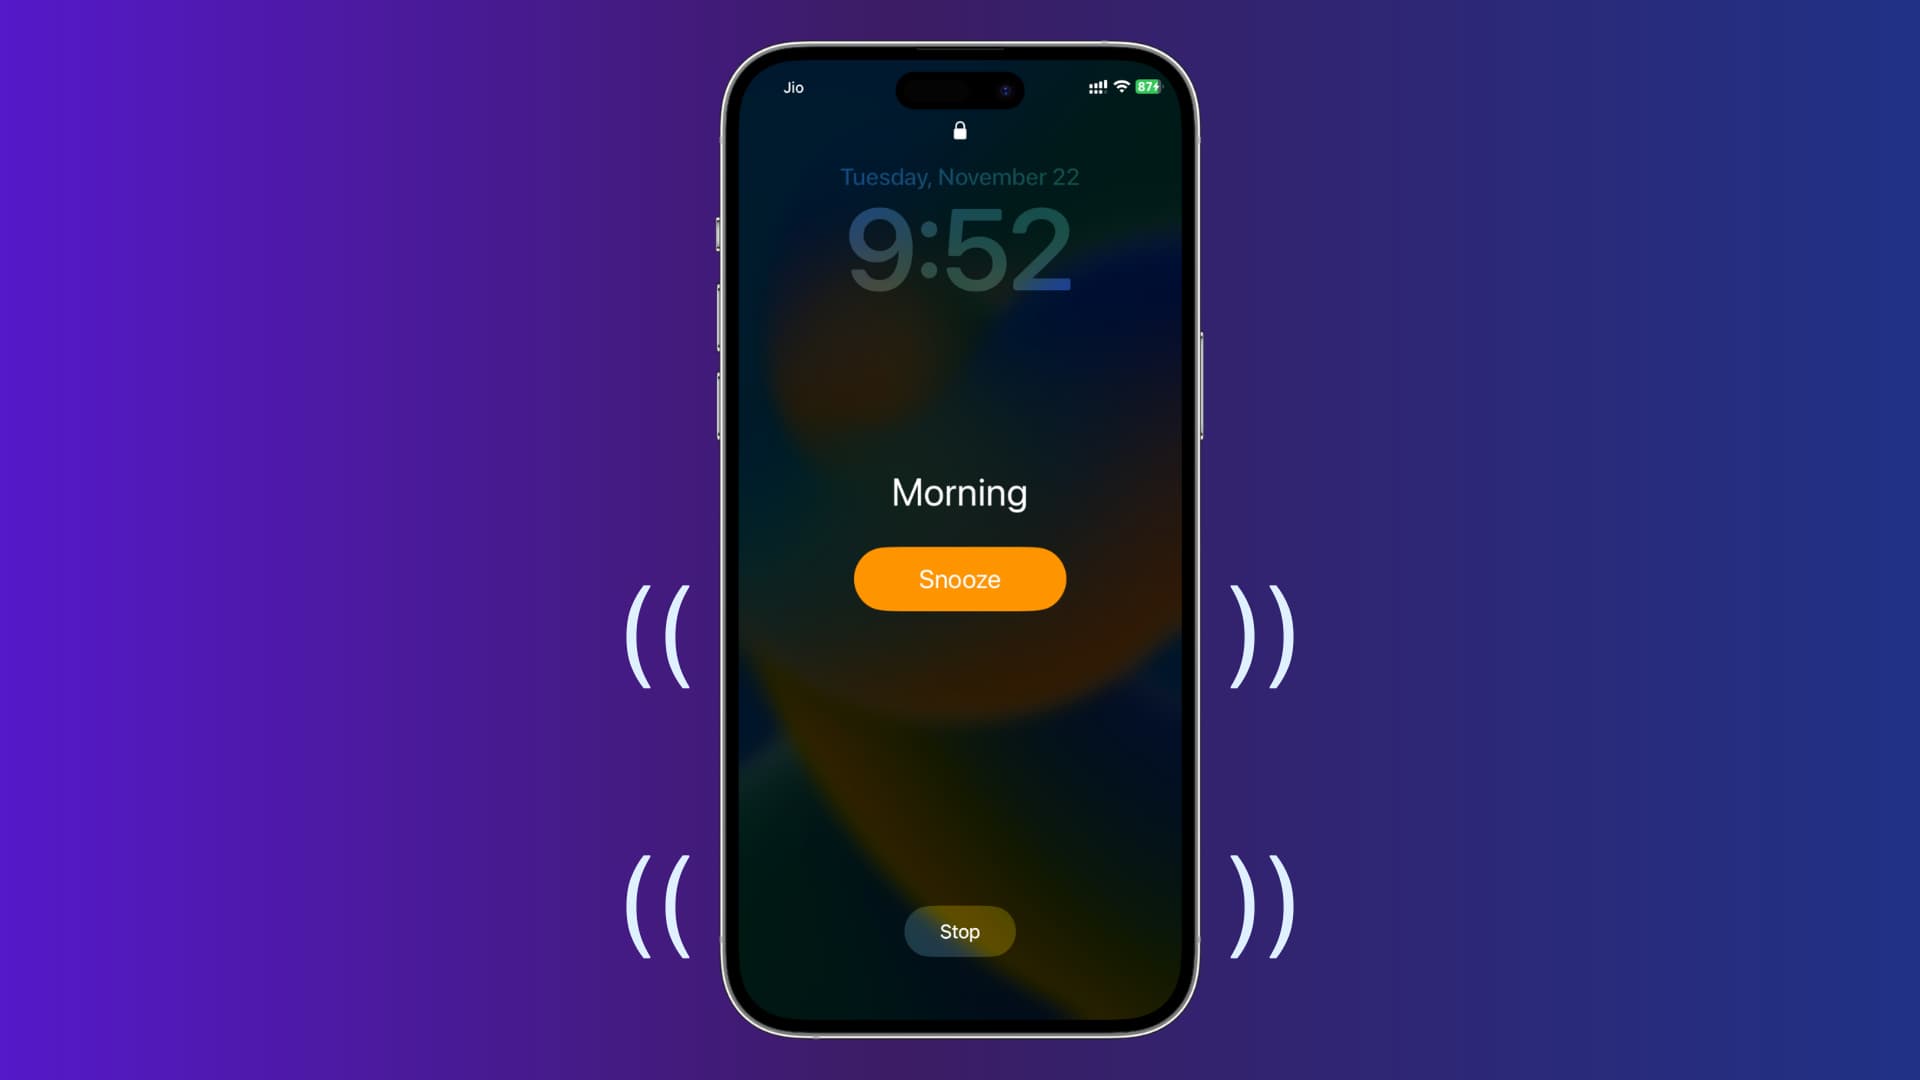 Vibrating alarm on iPhone that makes no sound